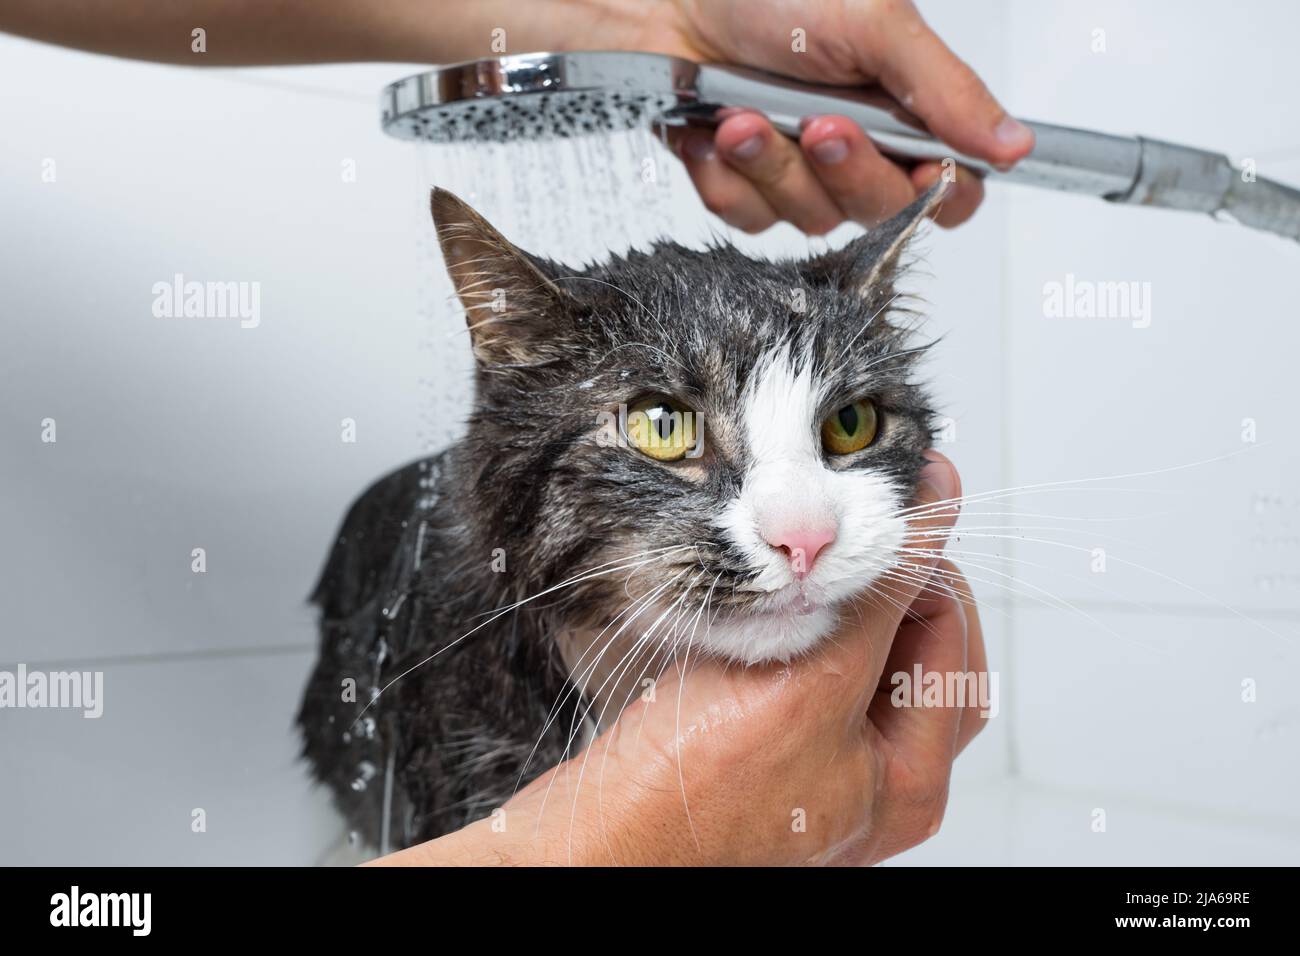 cat grooming. Funny cat taking shower or bath. Man washing cat. Pet hygiene concept. Wet cat. Stock Photo